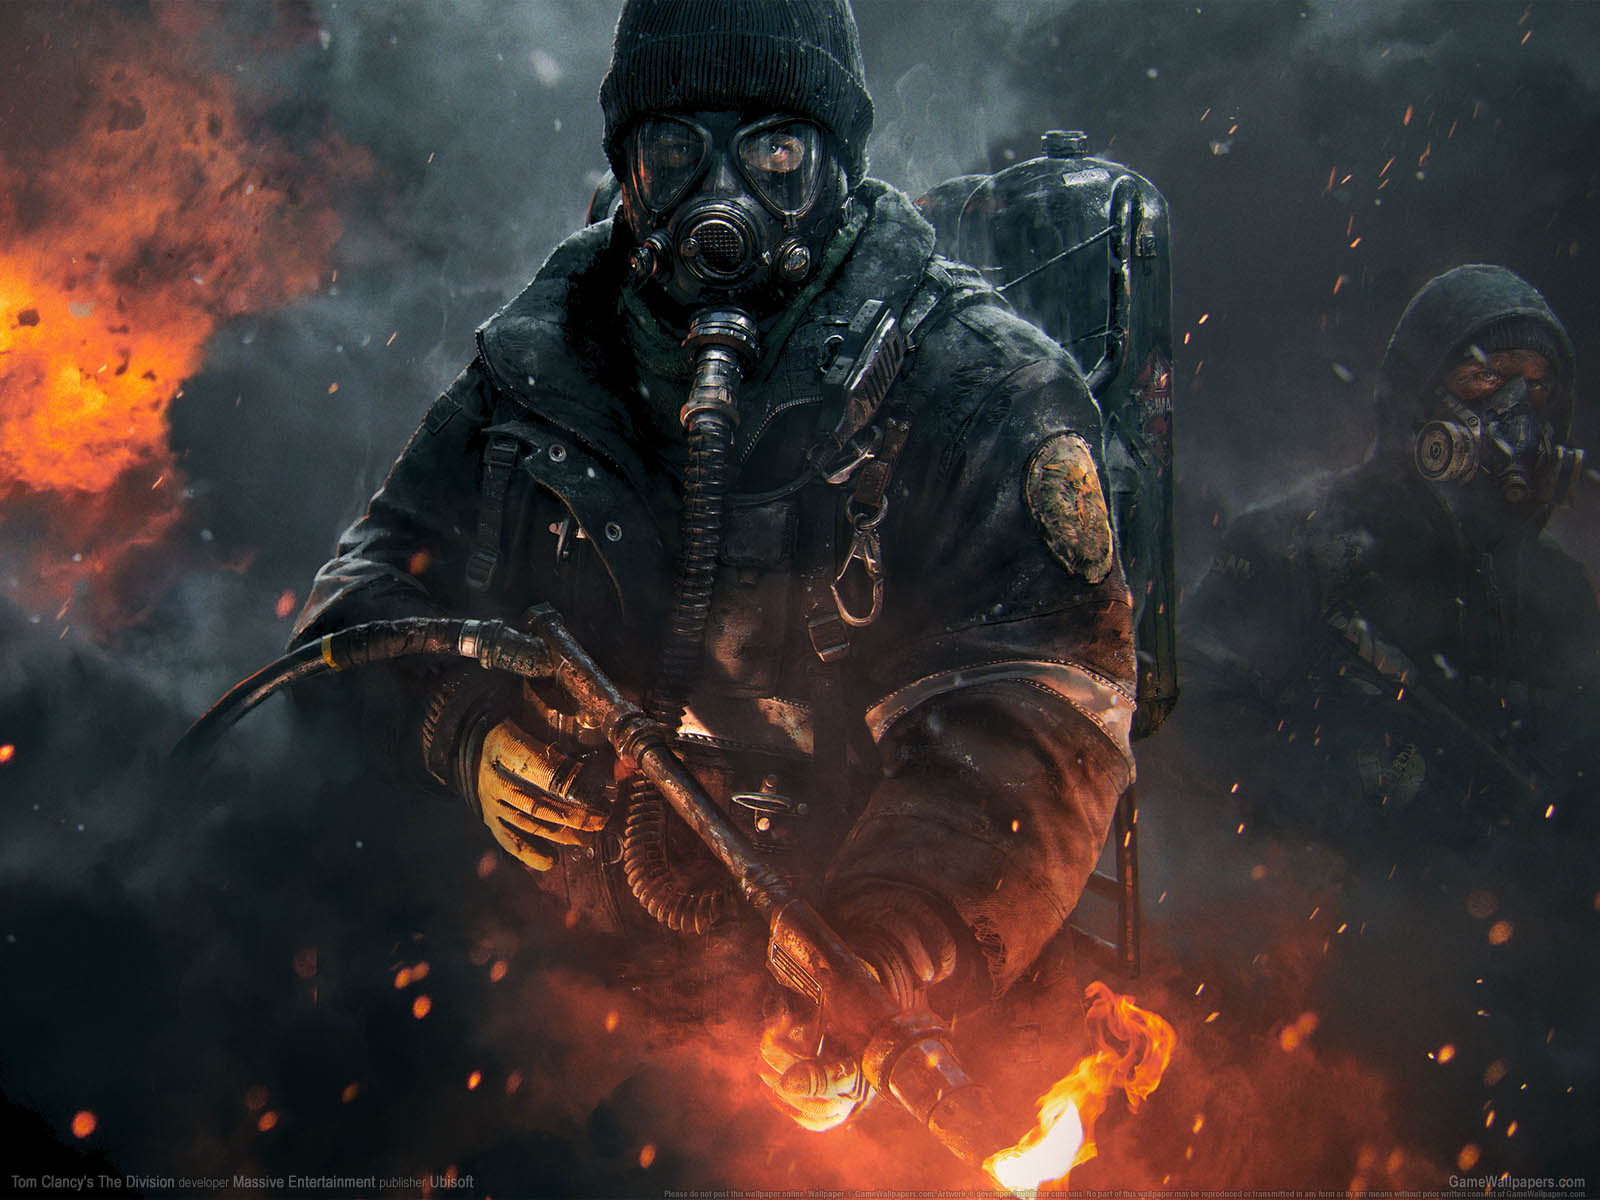 Tom Clancy's The Divisionνmmer=05 wallpaper  1600x1200